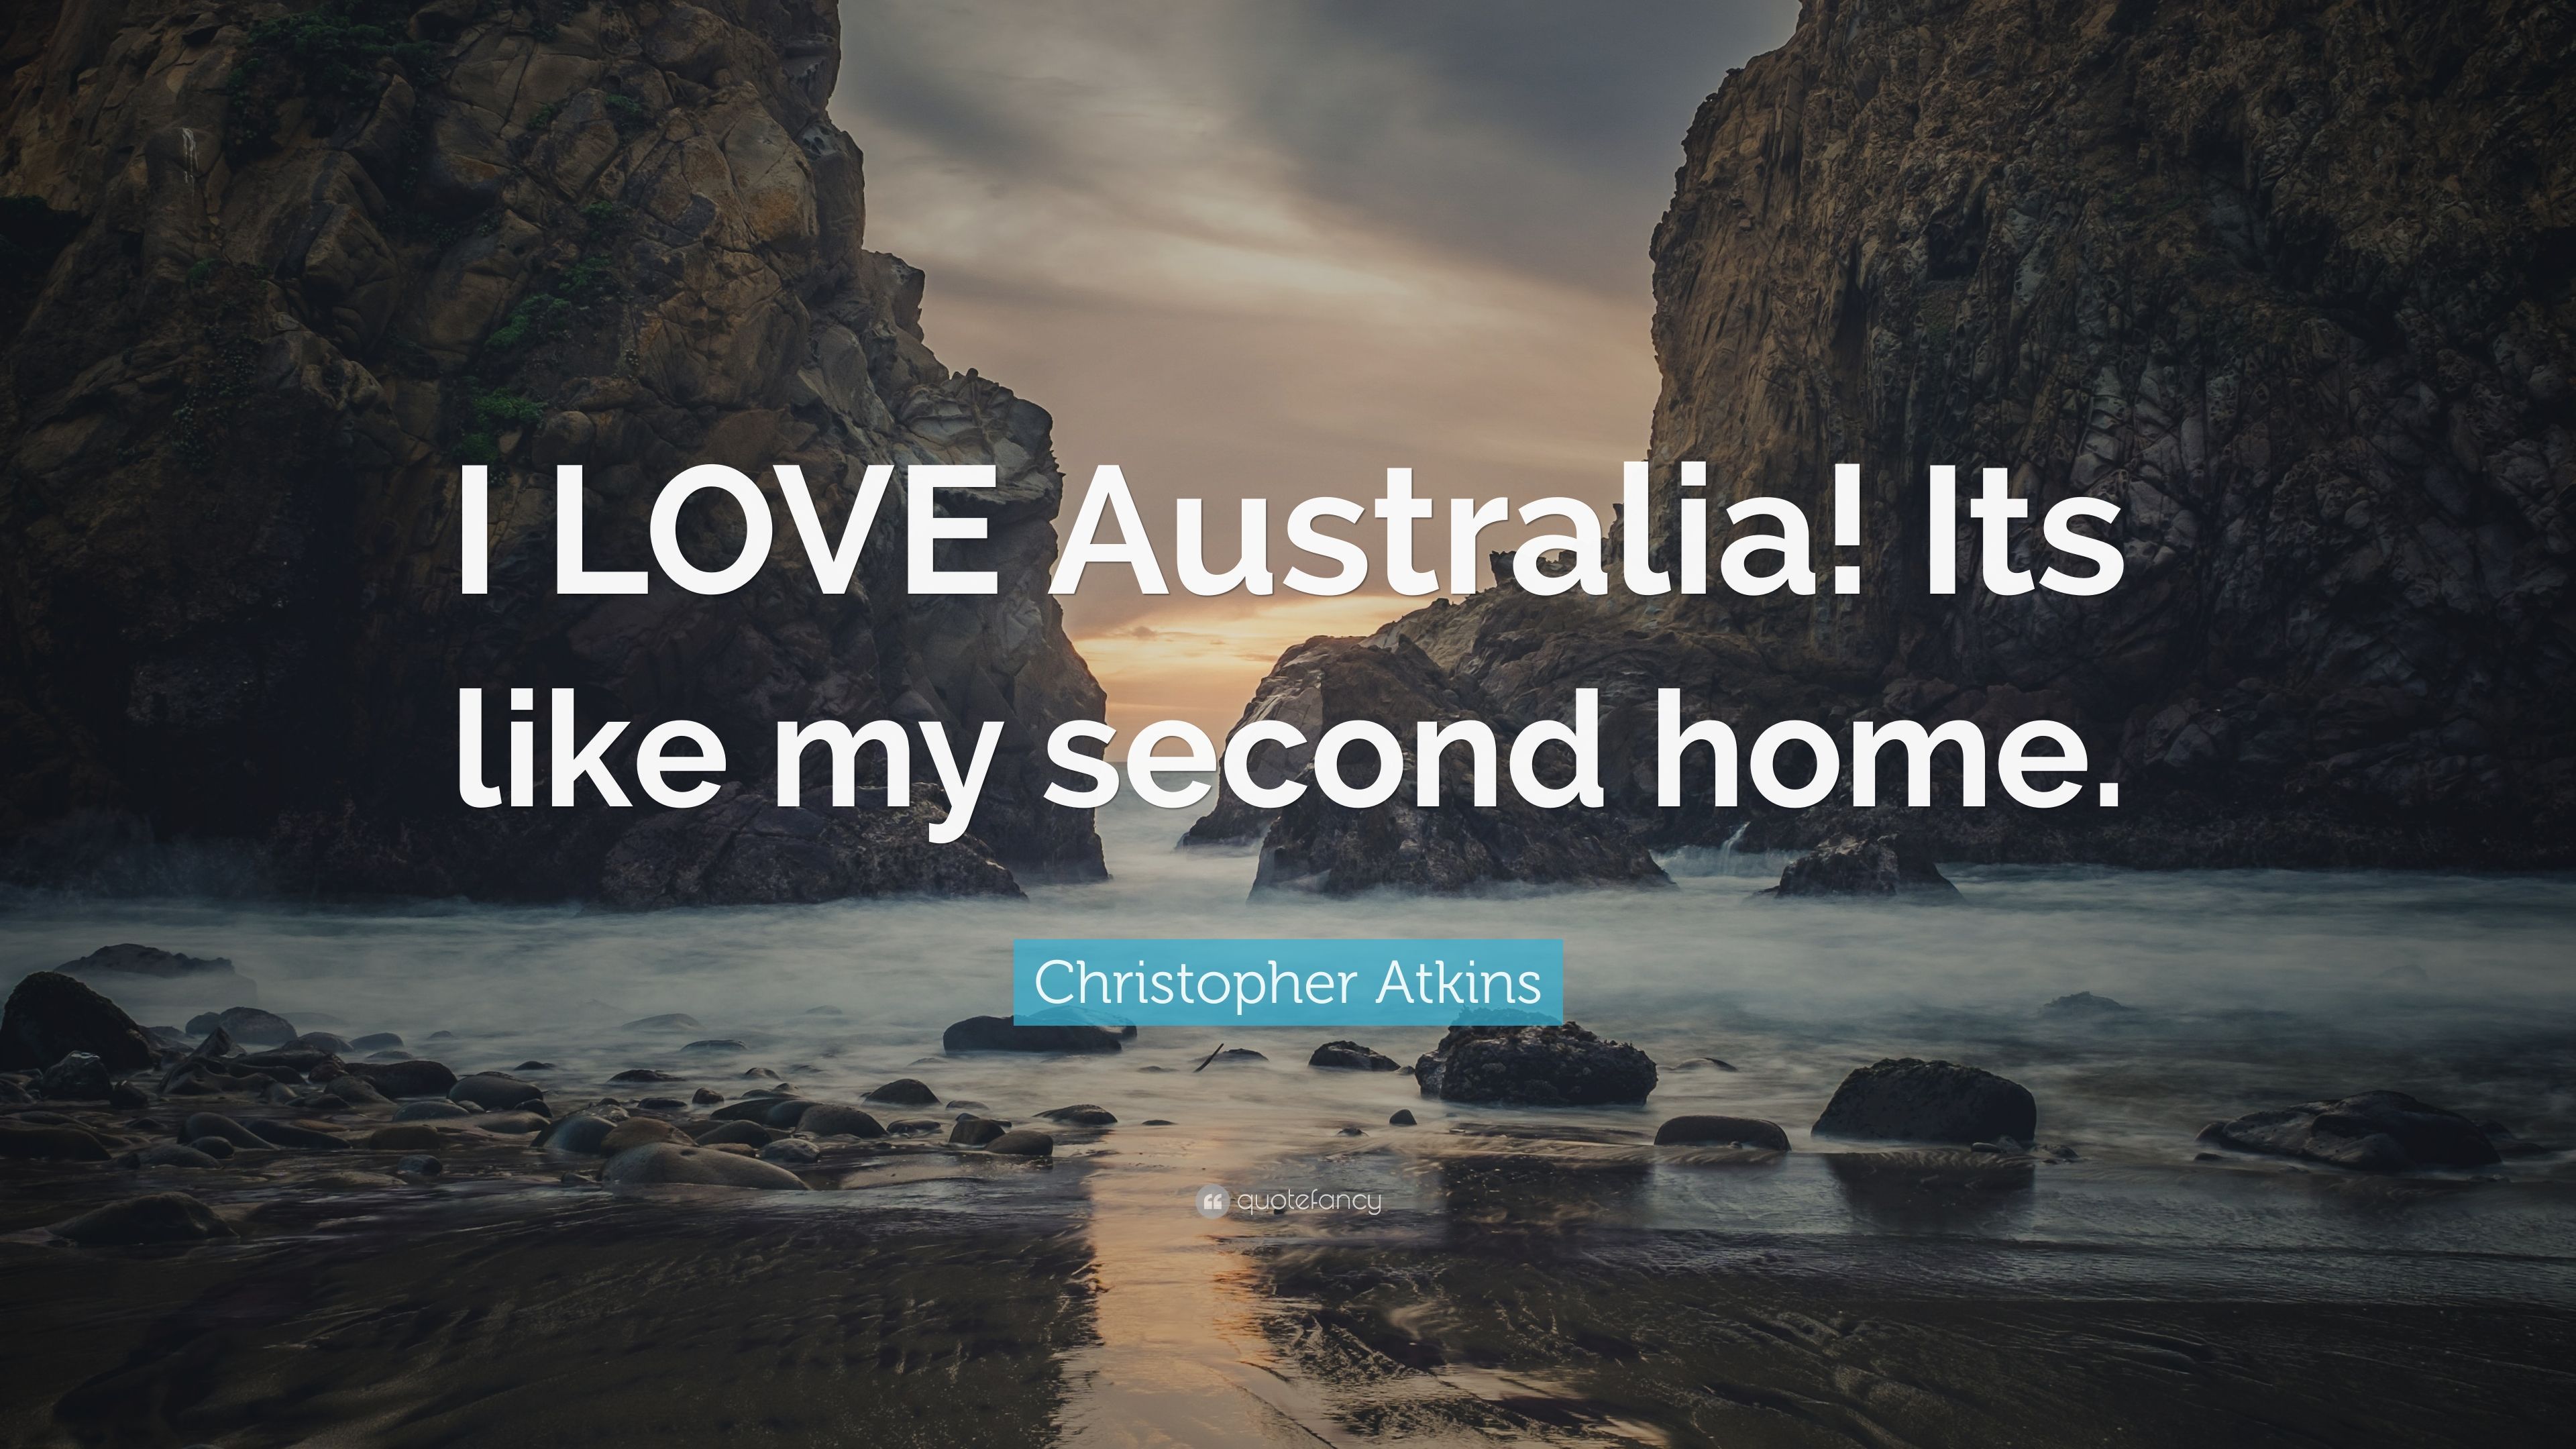 Christopher Atkins Quote: “I LOVE Australia! Its like my second home.” (7 wallpaper)